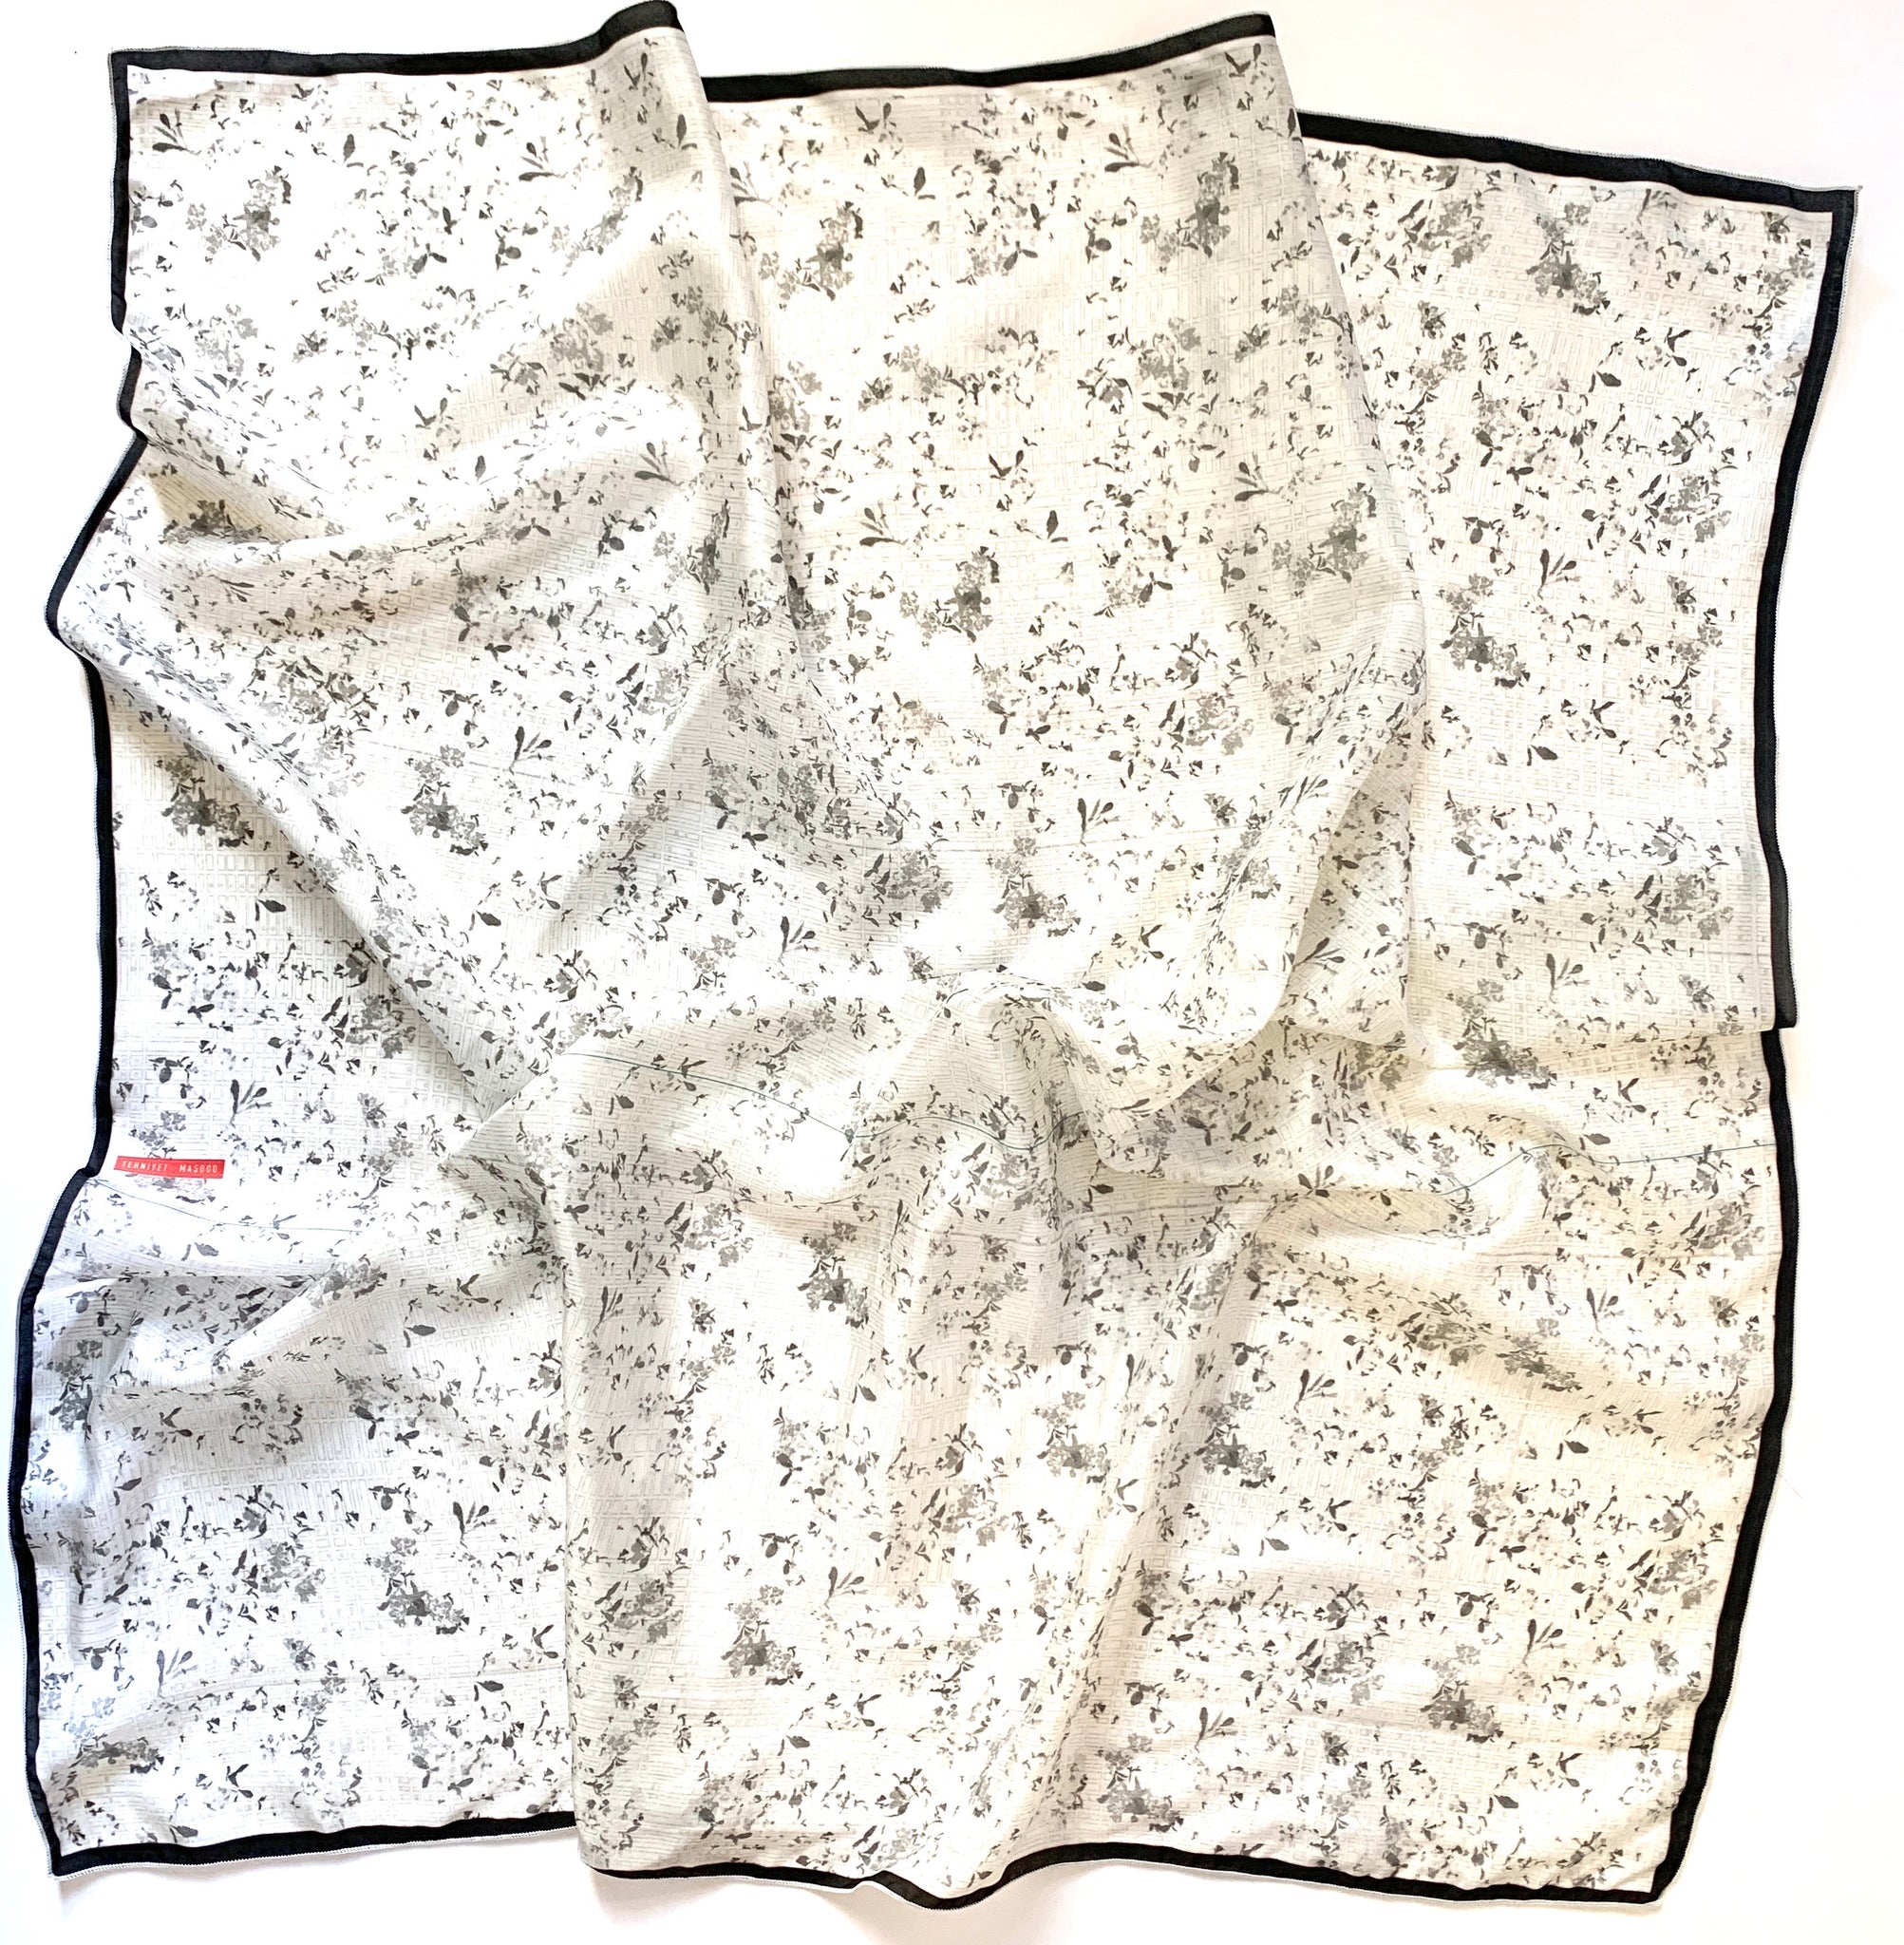 Black & White Flora Silk Scarf designed by NYC designer Tehniyet Masood in 2020. Chic gift for those who have it all. 36 inches by 36 inches. Best silk scarves to gift, cool modern designs that elevate your chic closet. Luxurious, fashionable, beautiful, and unique. Best gifts to give in 2020